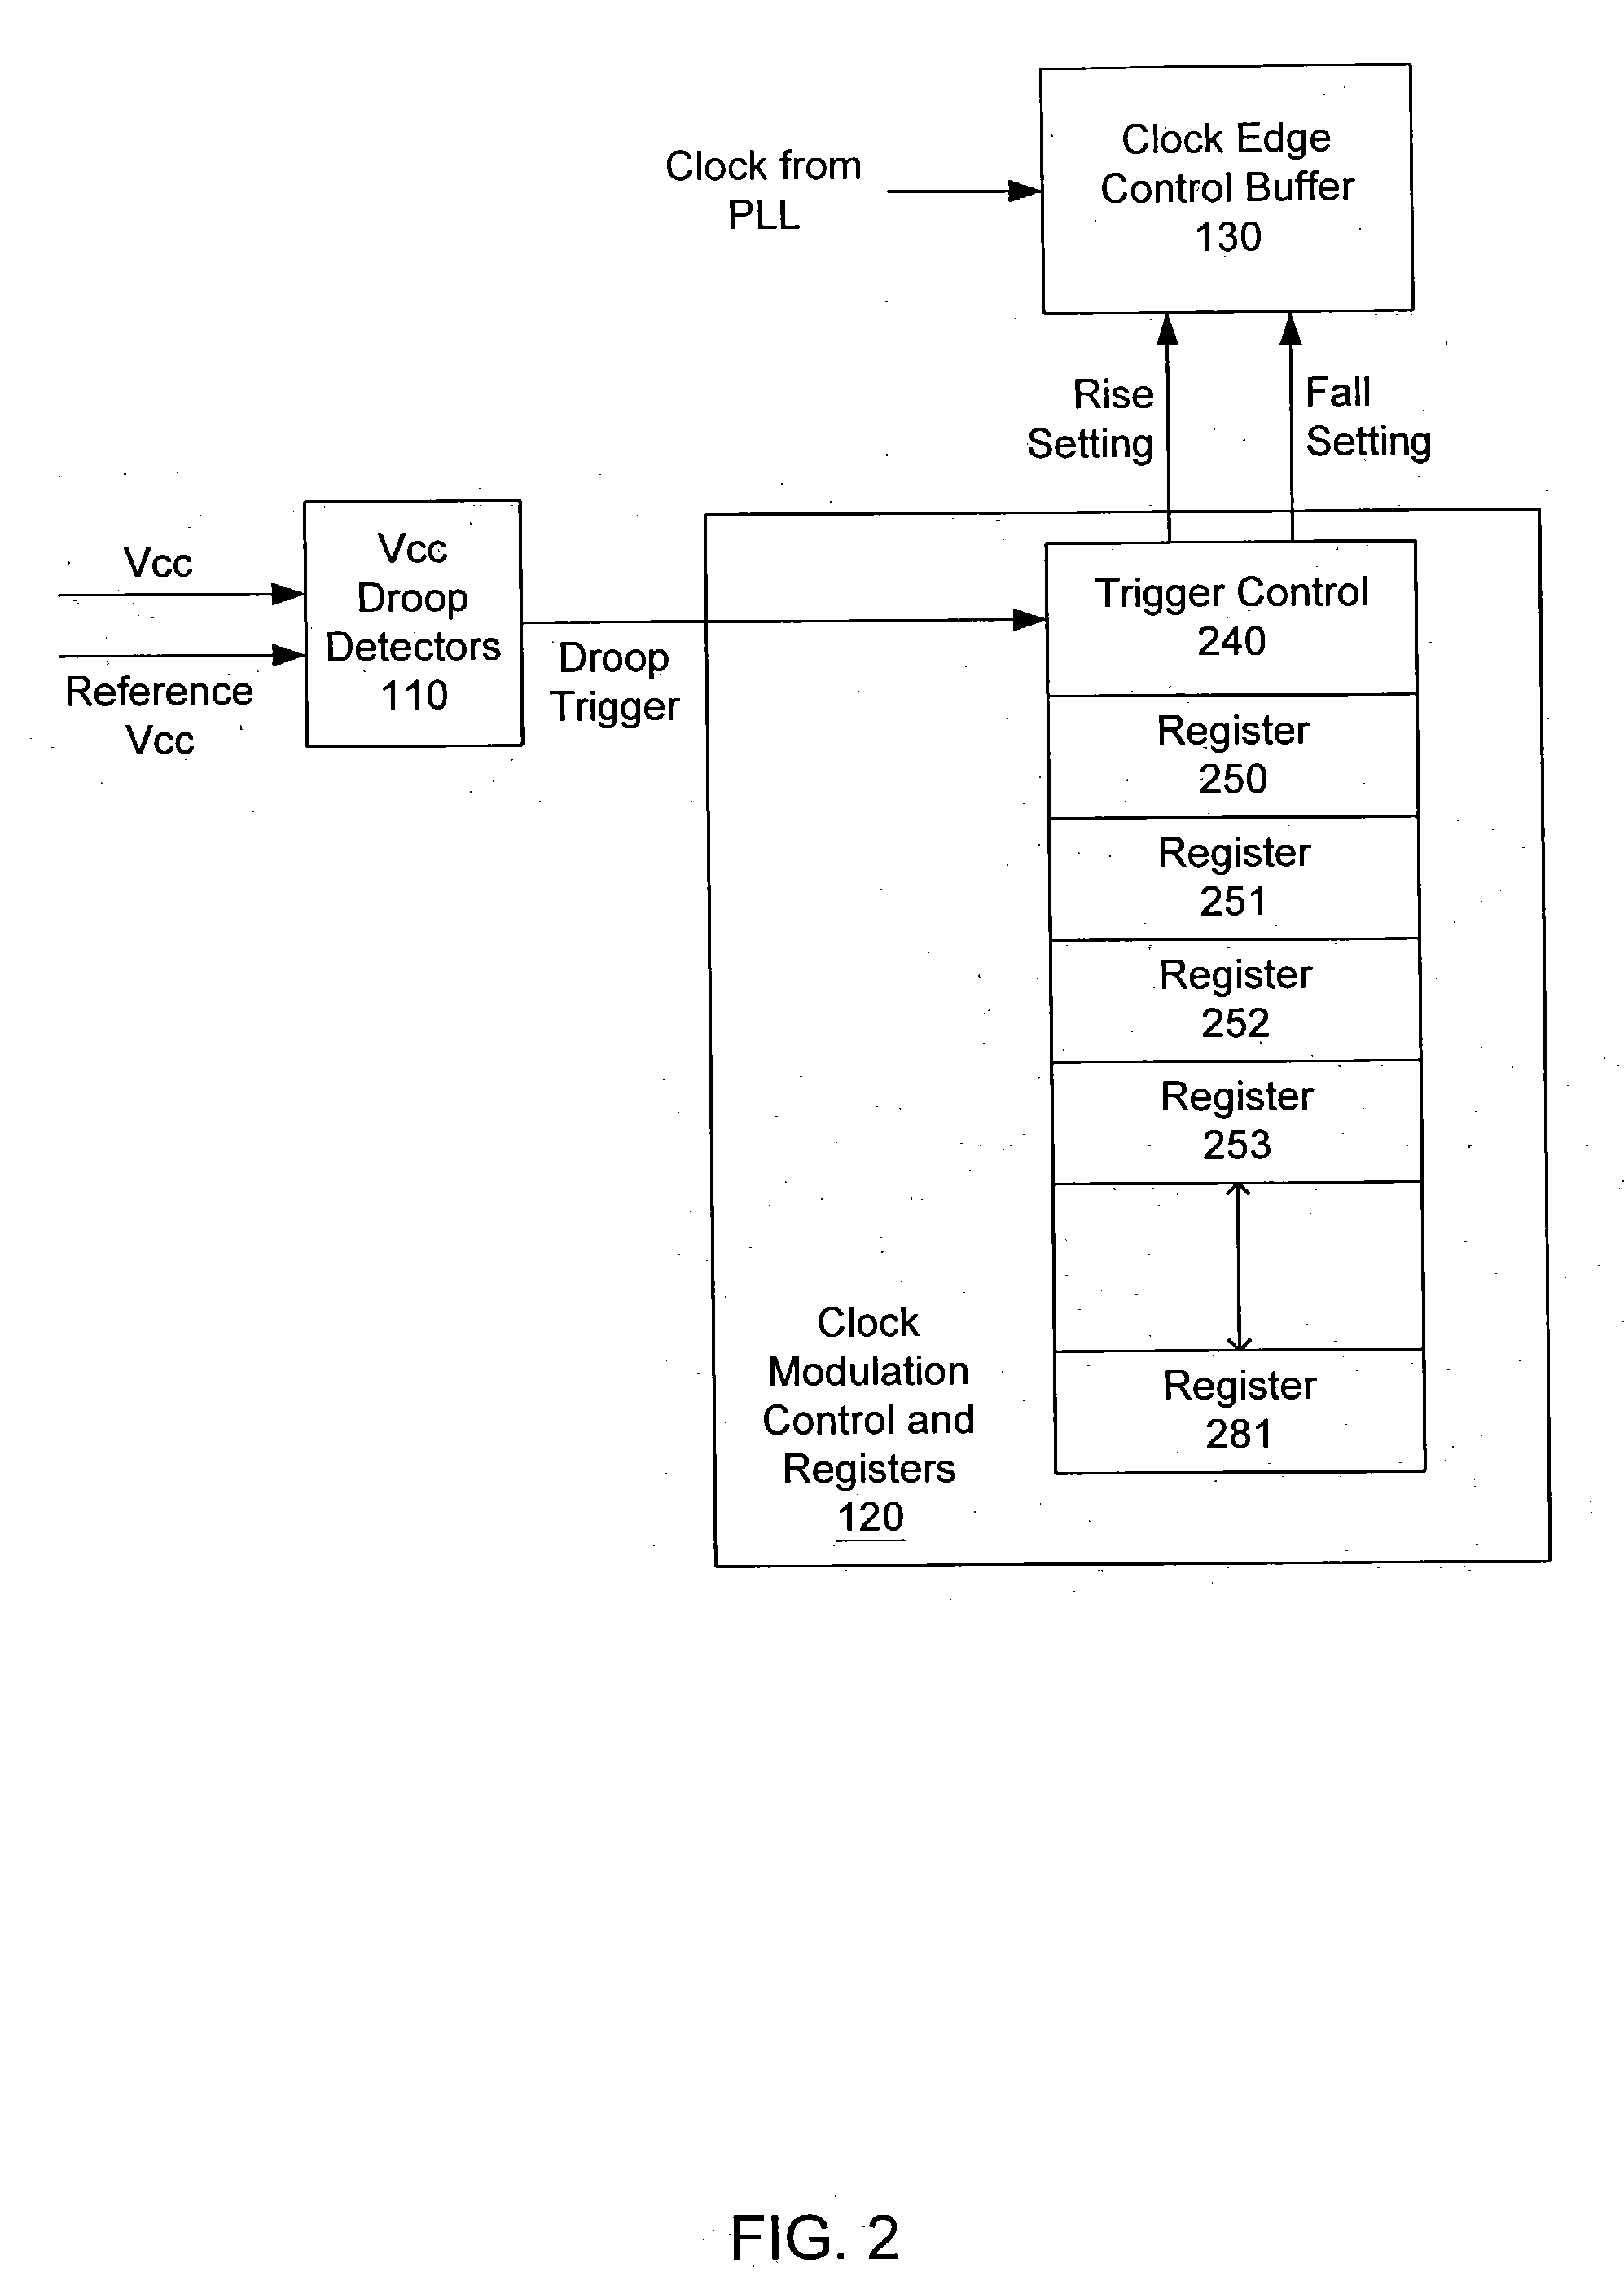 Power supply voltage droop compensated clock modulation for microprocessors